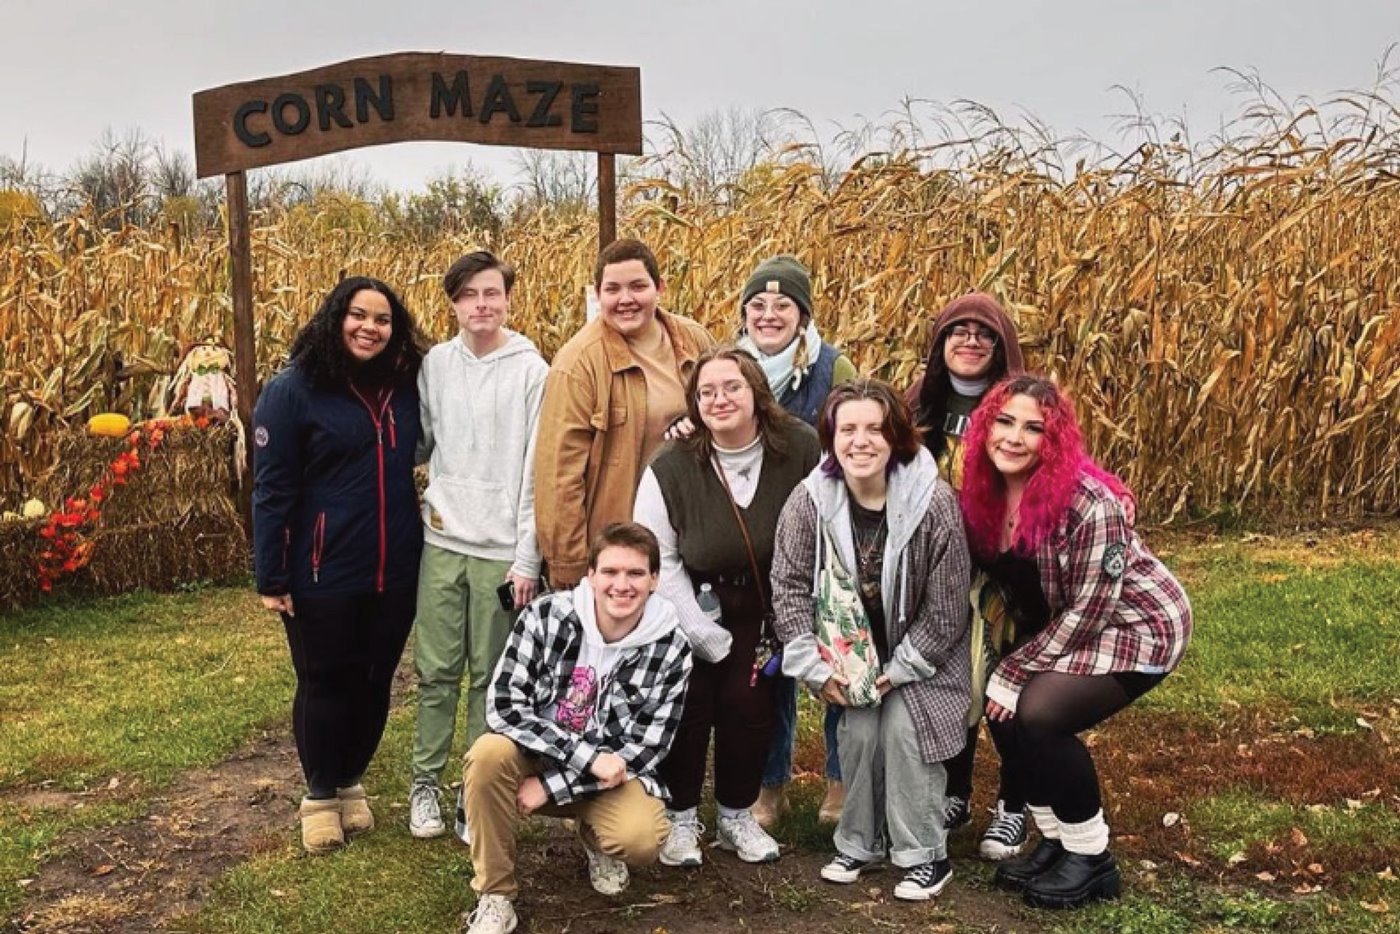 Theta Eta Alpha, a gender-inclusive sorority, poses in front of a corn maze at a social outing